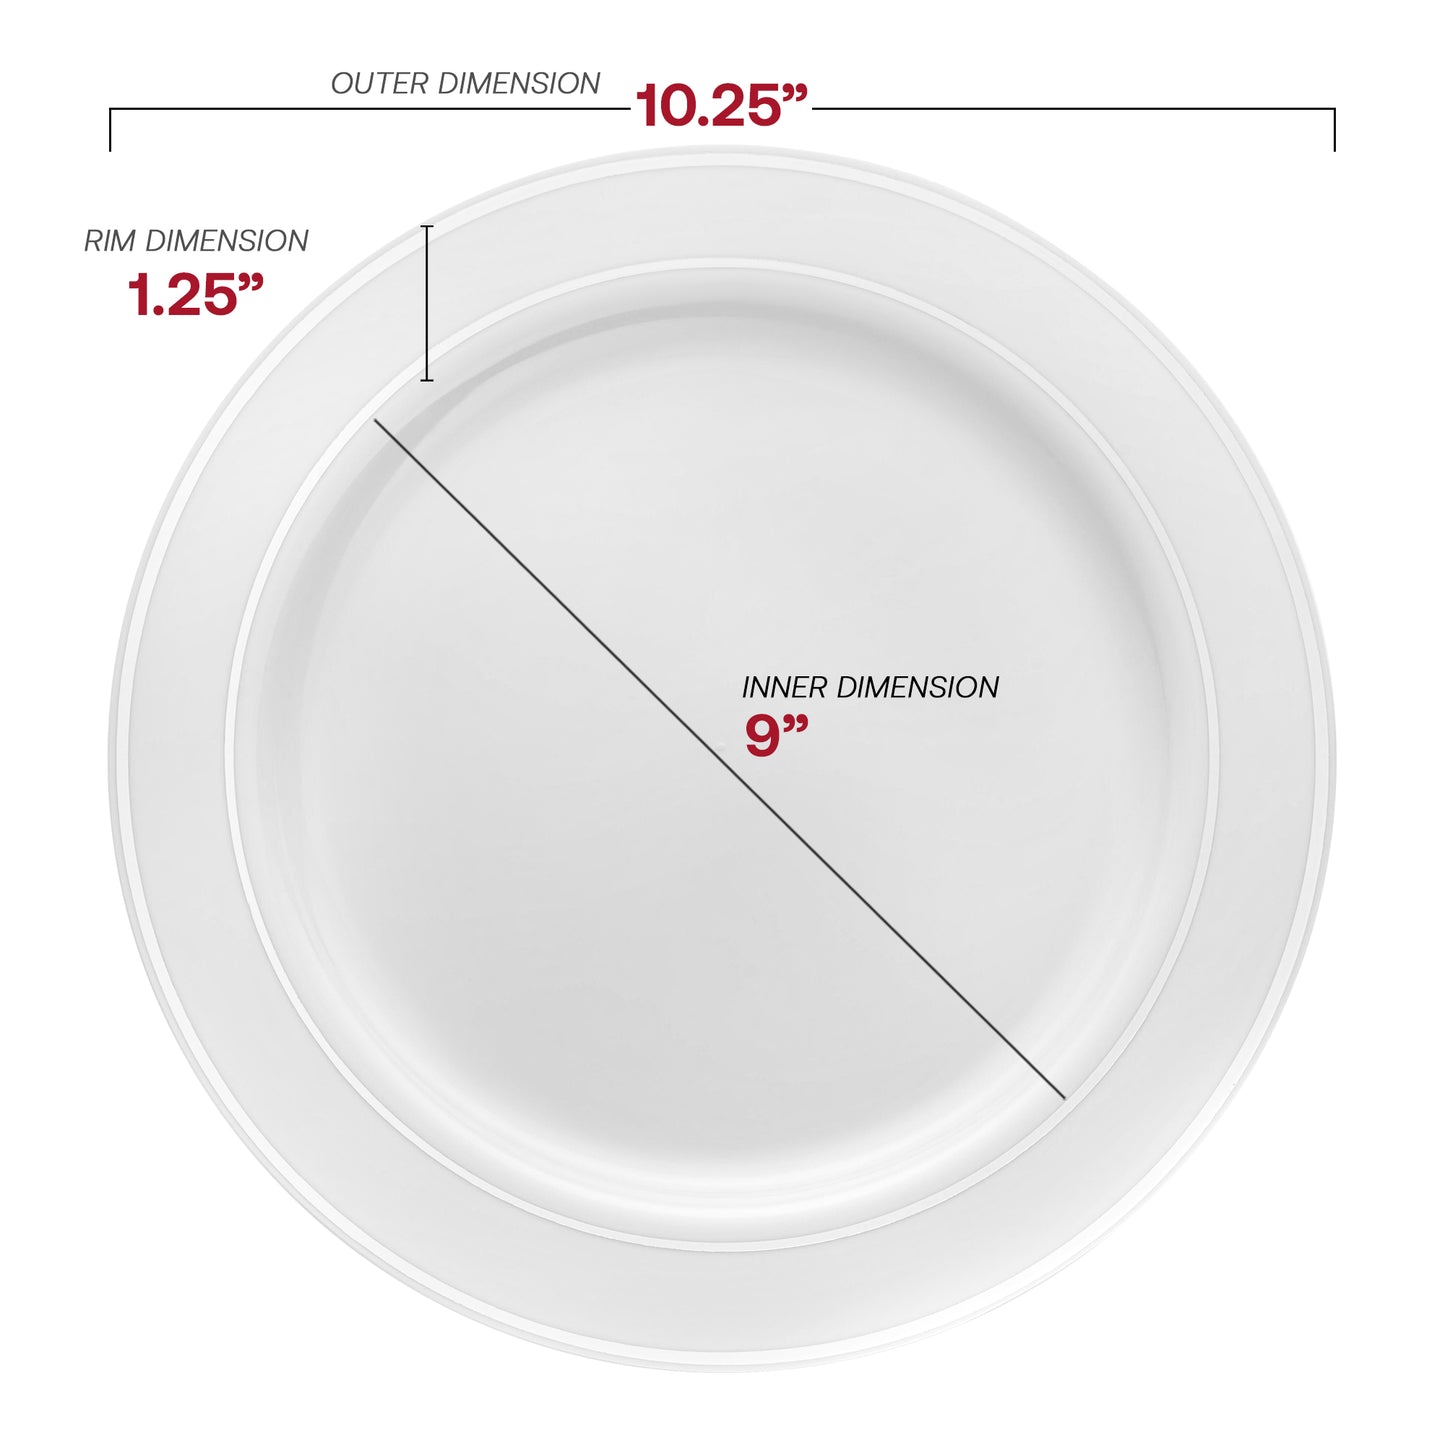 White with Silver Edge Rim Plastic Dinner Plates (10.25") Dimension | The Kaya Collection